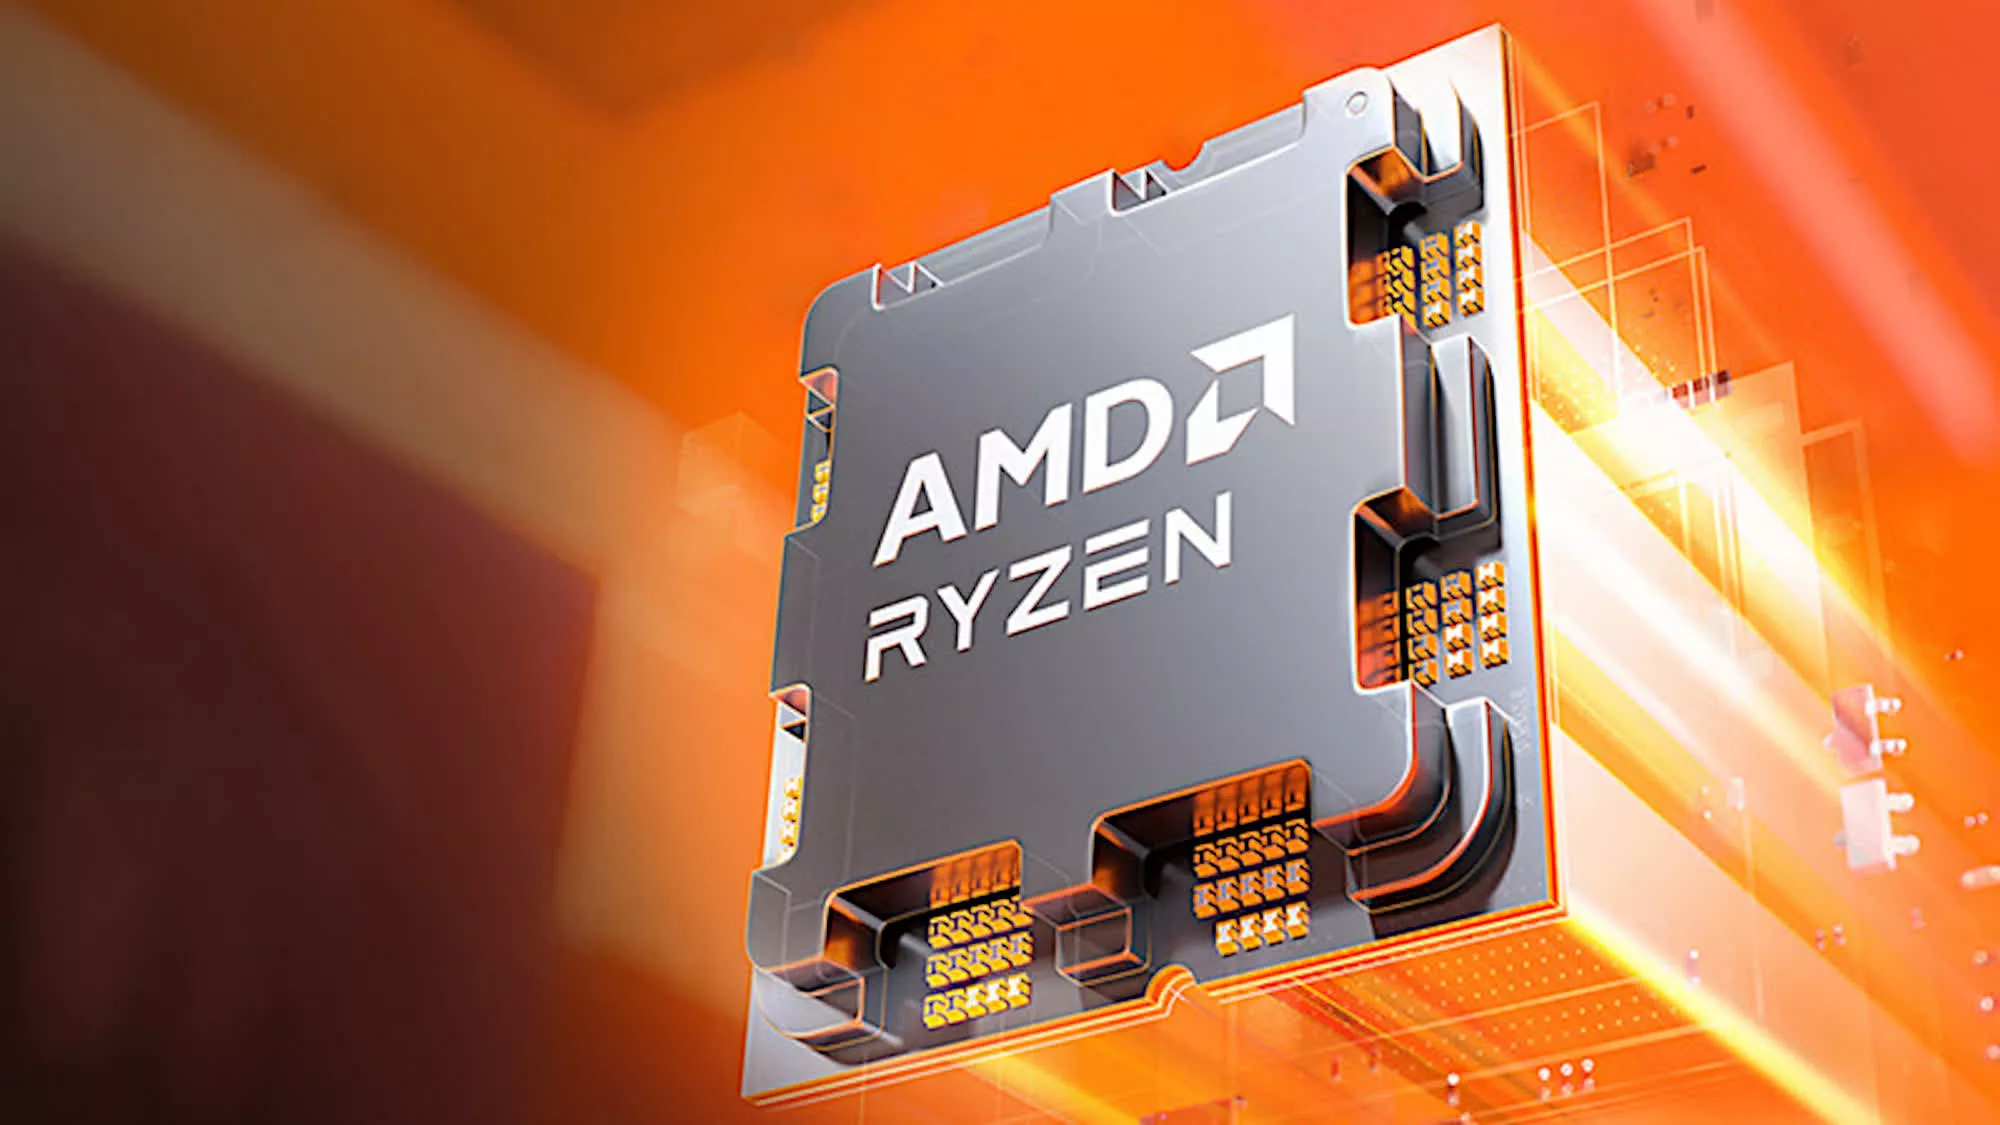 AMD launches Ryzen 7 8700F and Ryzen 5 8400F “Hawk Level” CPUs: budget processors lacking iGPUs